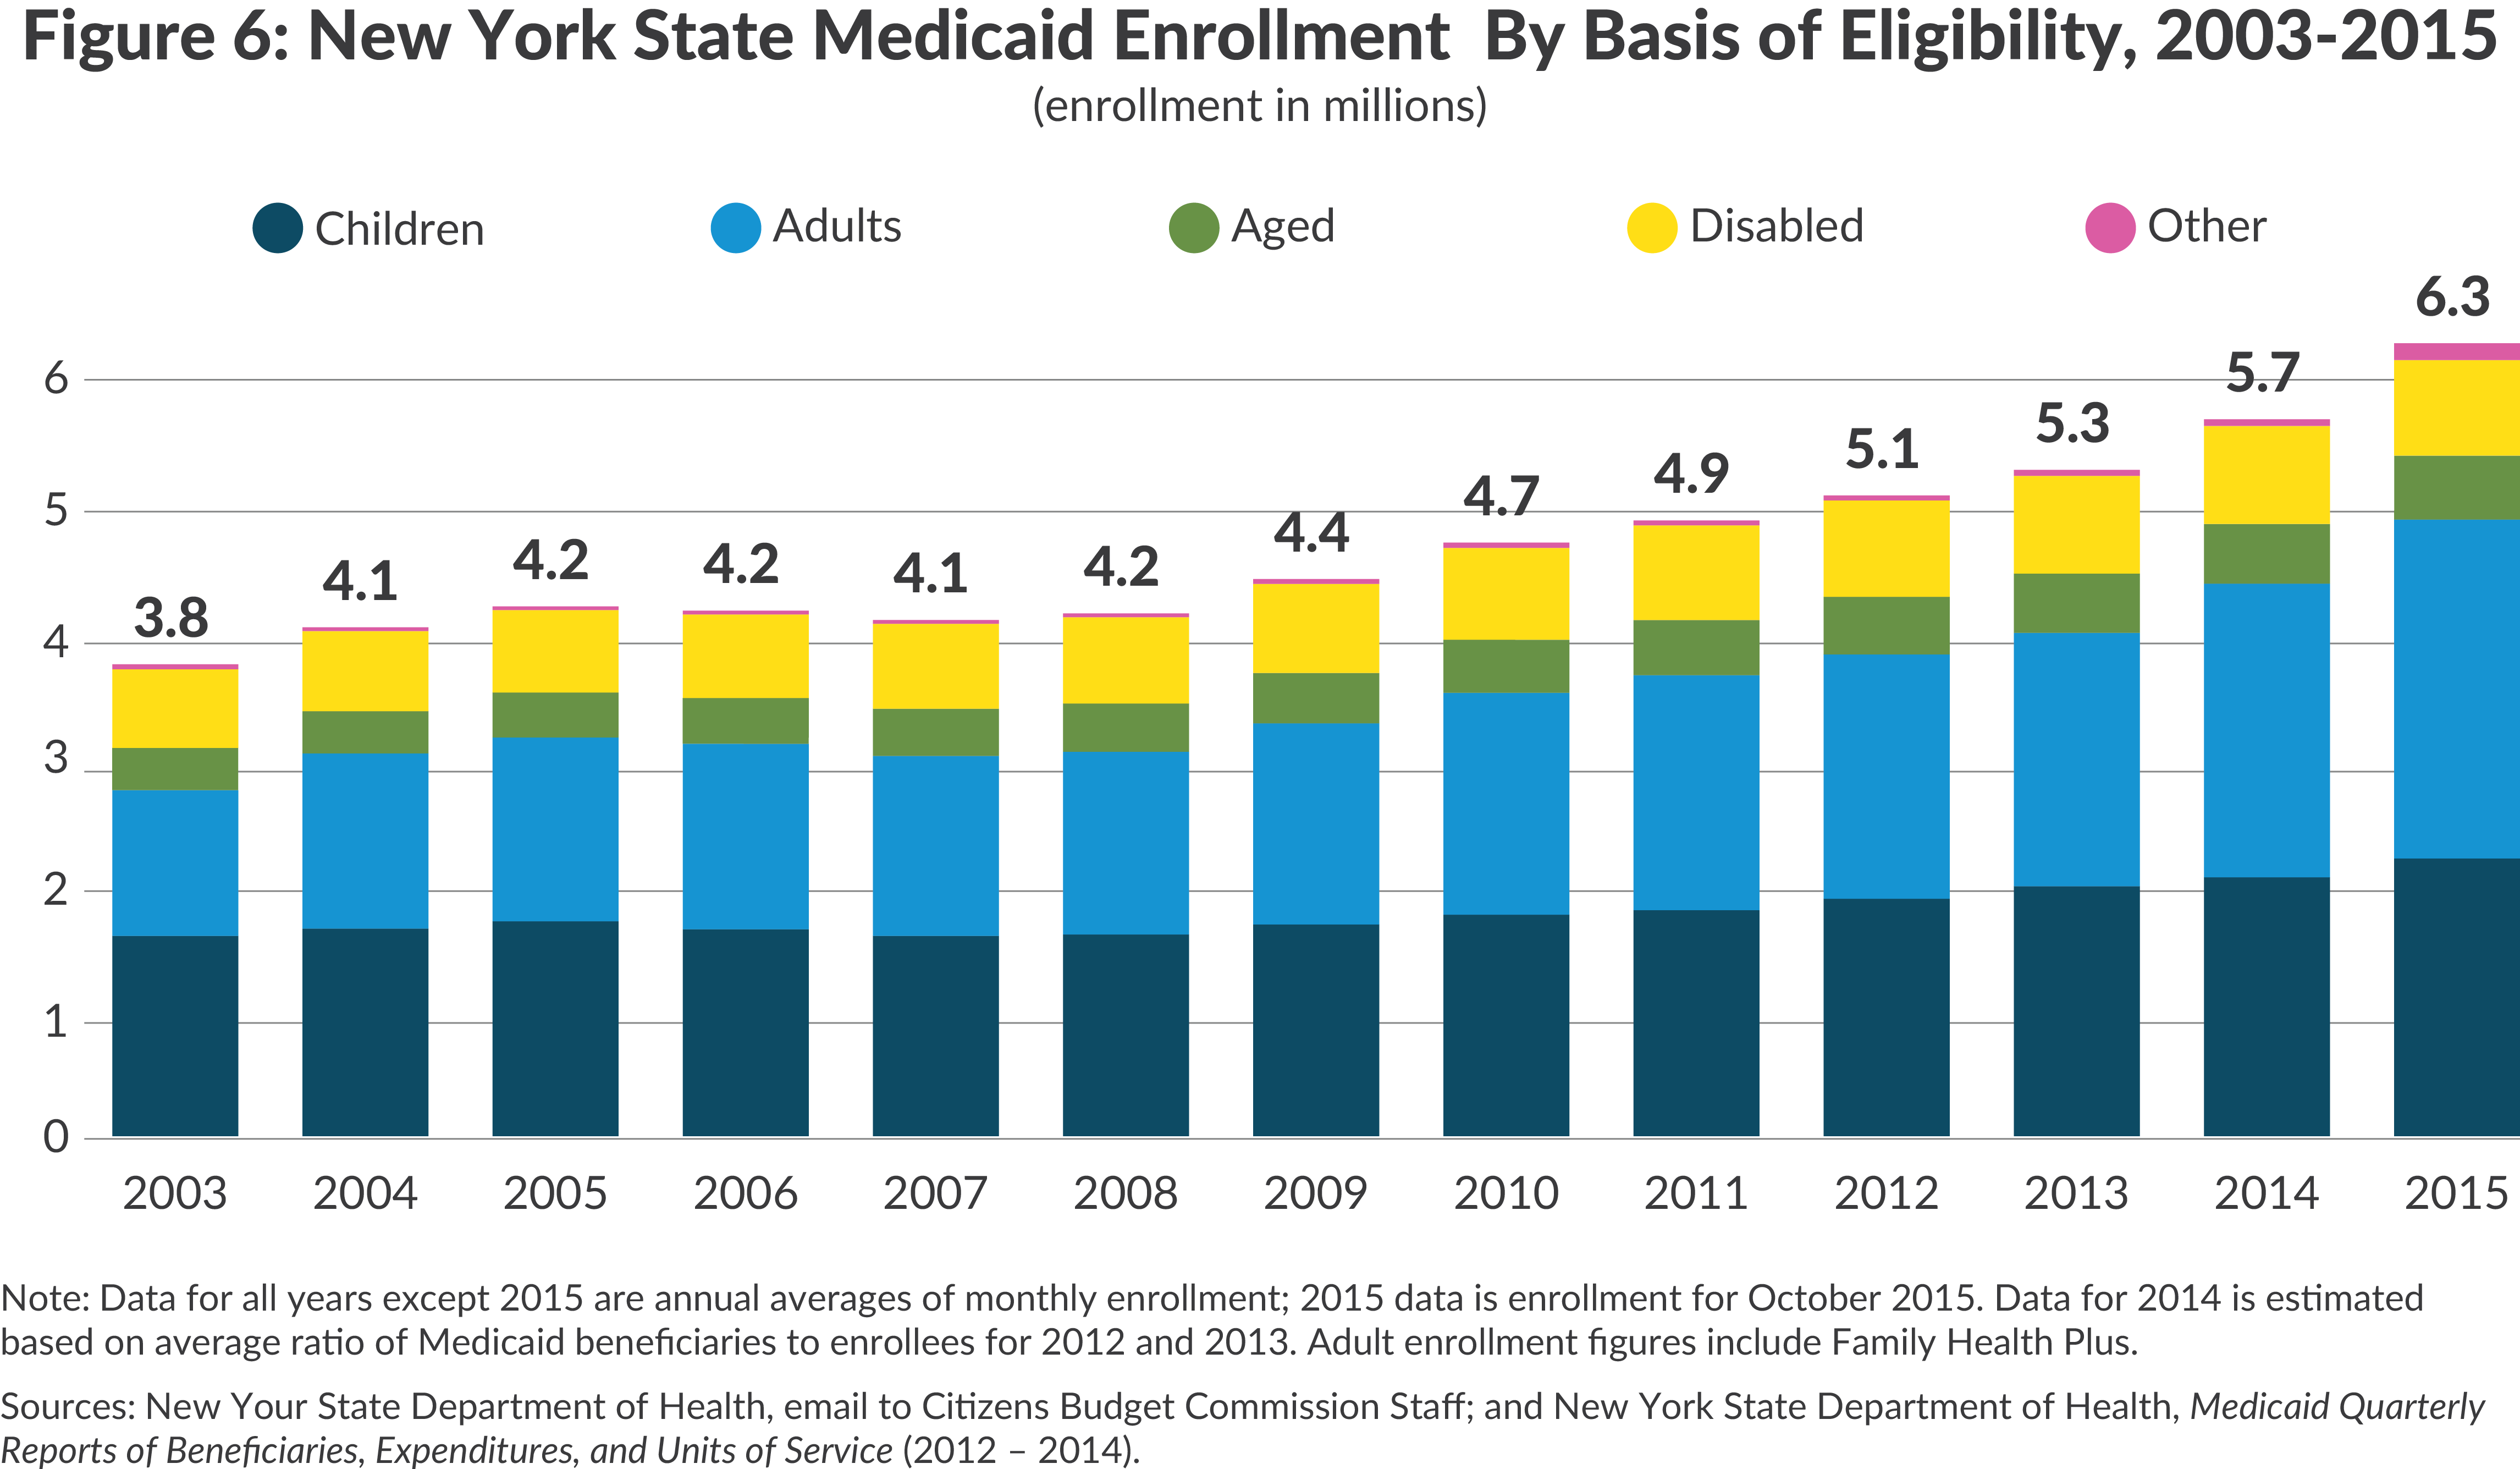 NY State enrollment by basis of eligibility